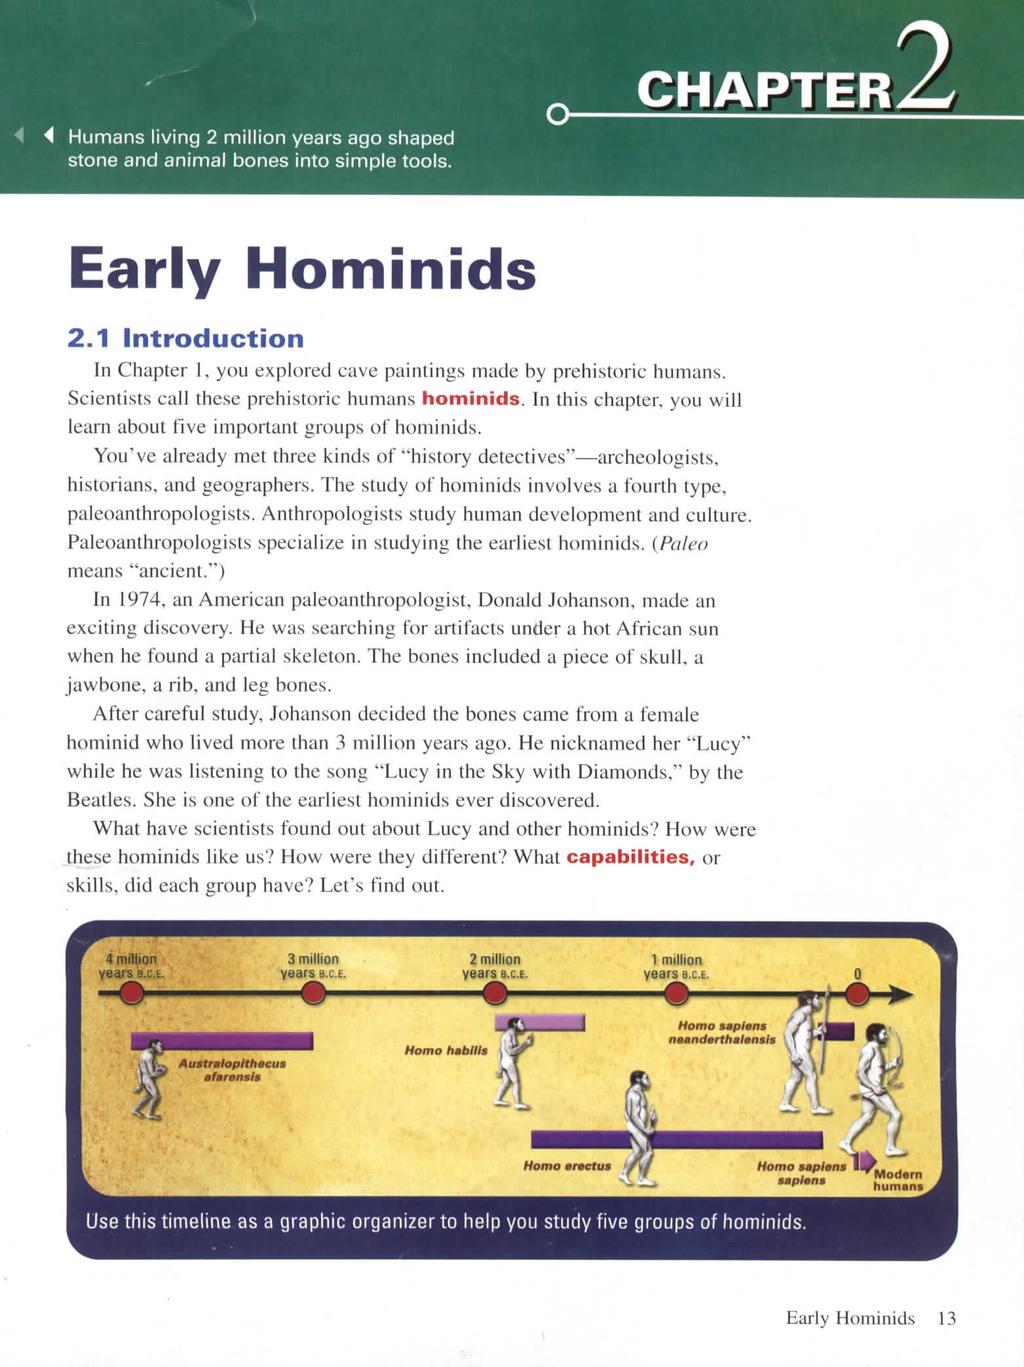 CHAPTER 4 Humans living 2 million years ago shaped stone and animal bones into simple tools. Early Hominids 2.1 Introduction In Chapter 1, you explored cave paintings made by prehistoric humans.